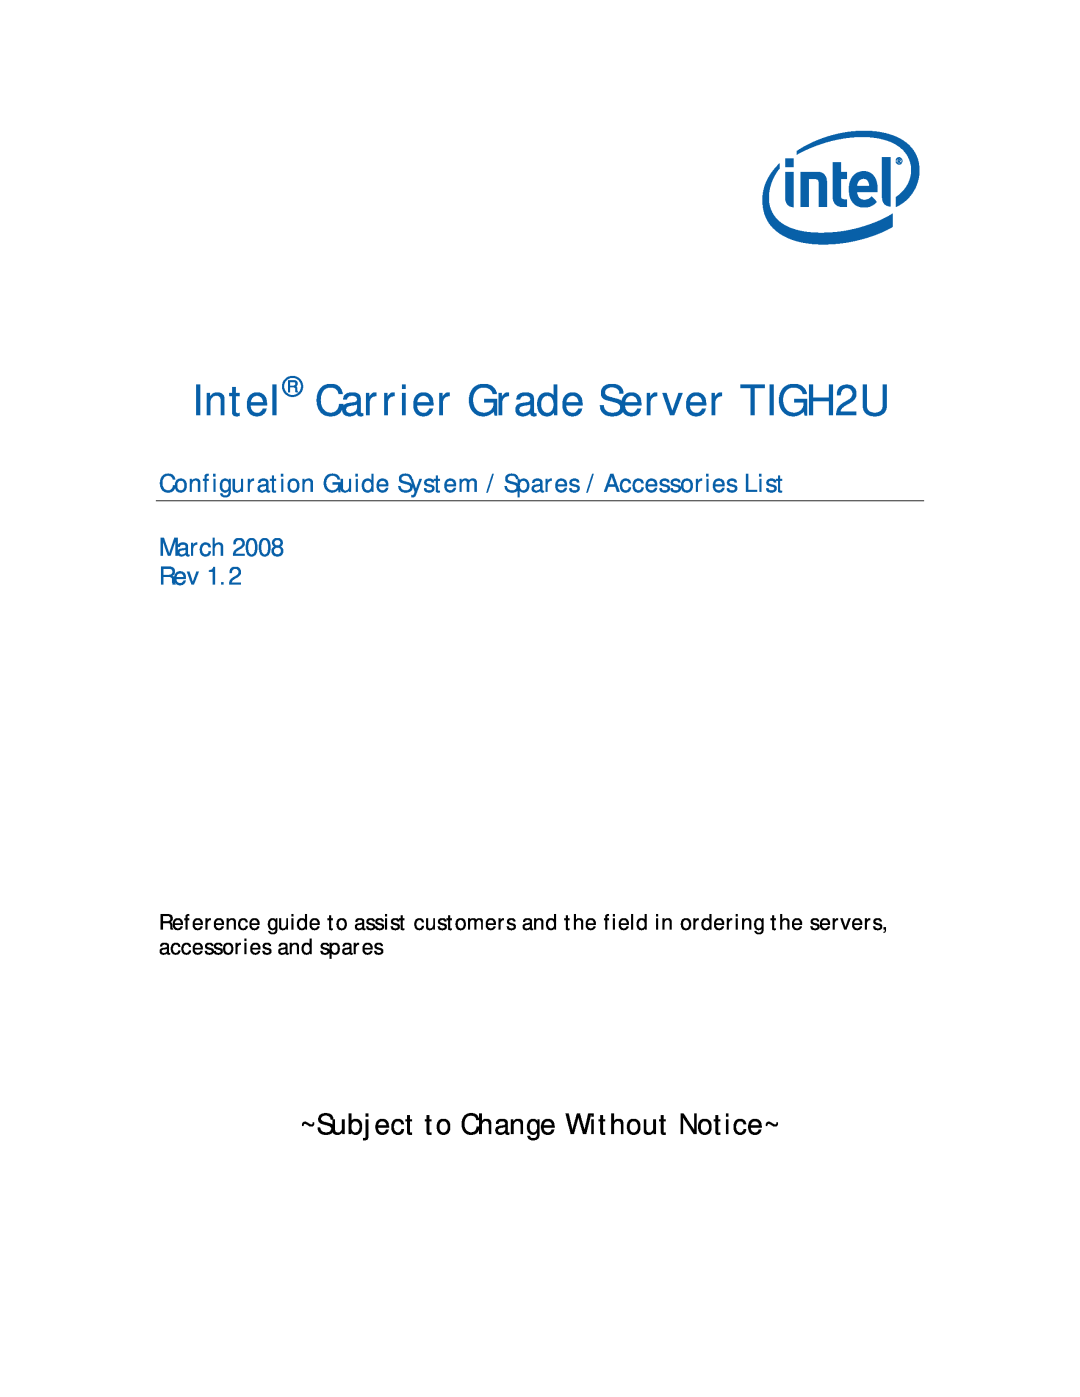 Intel manual ~Subject to Change Without Notice~, Intel Carrier Grade Server TIGH2U, March Rev 